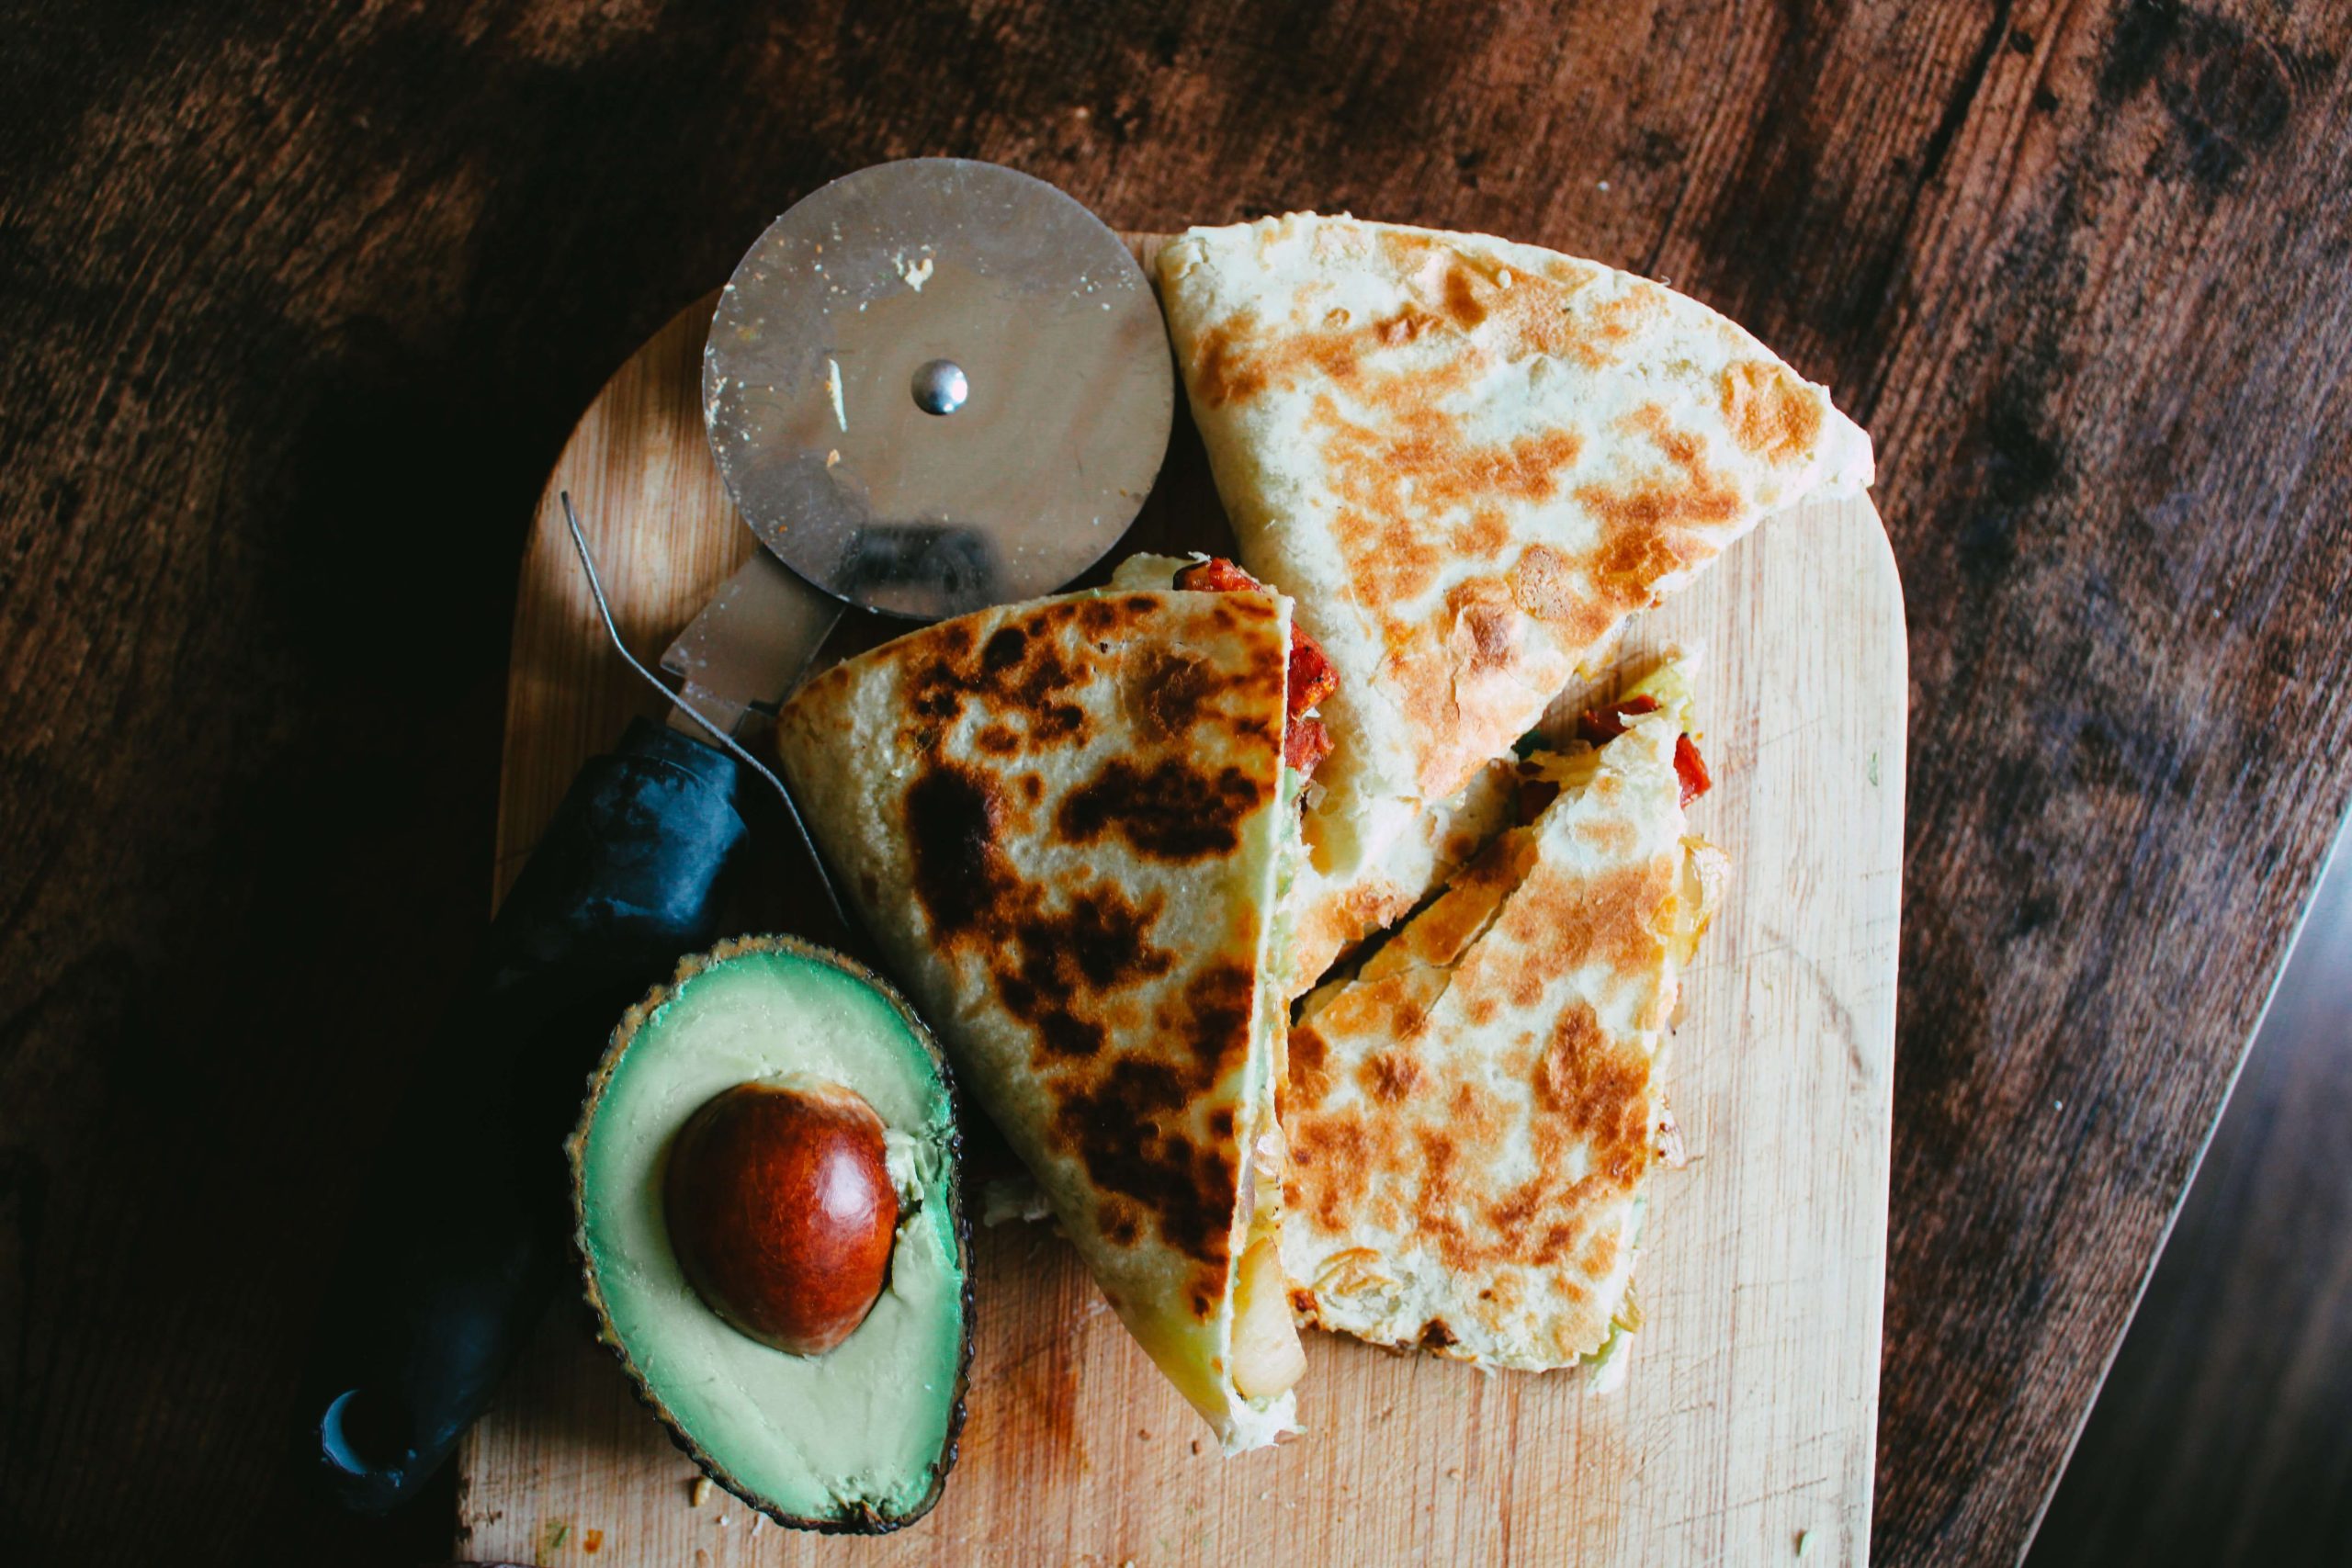 How Many Calories In a Cheese Quesadilla?